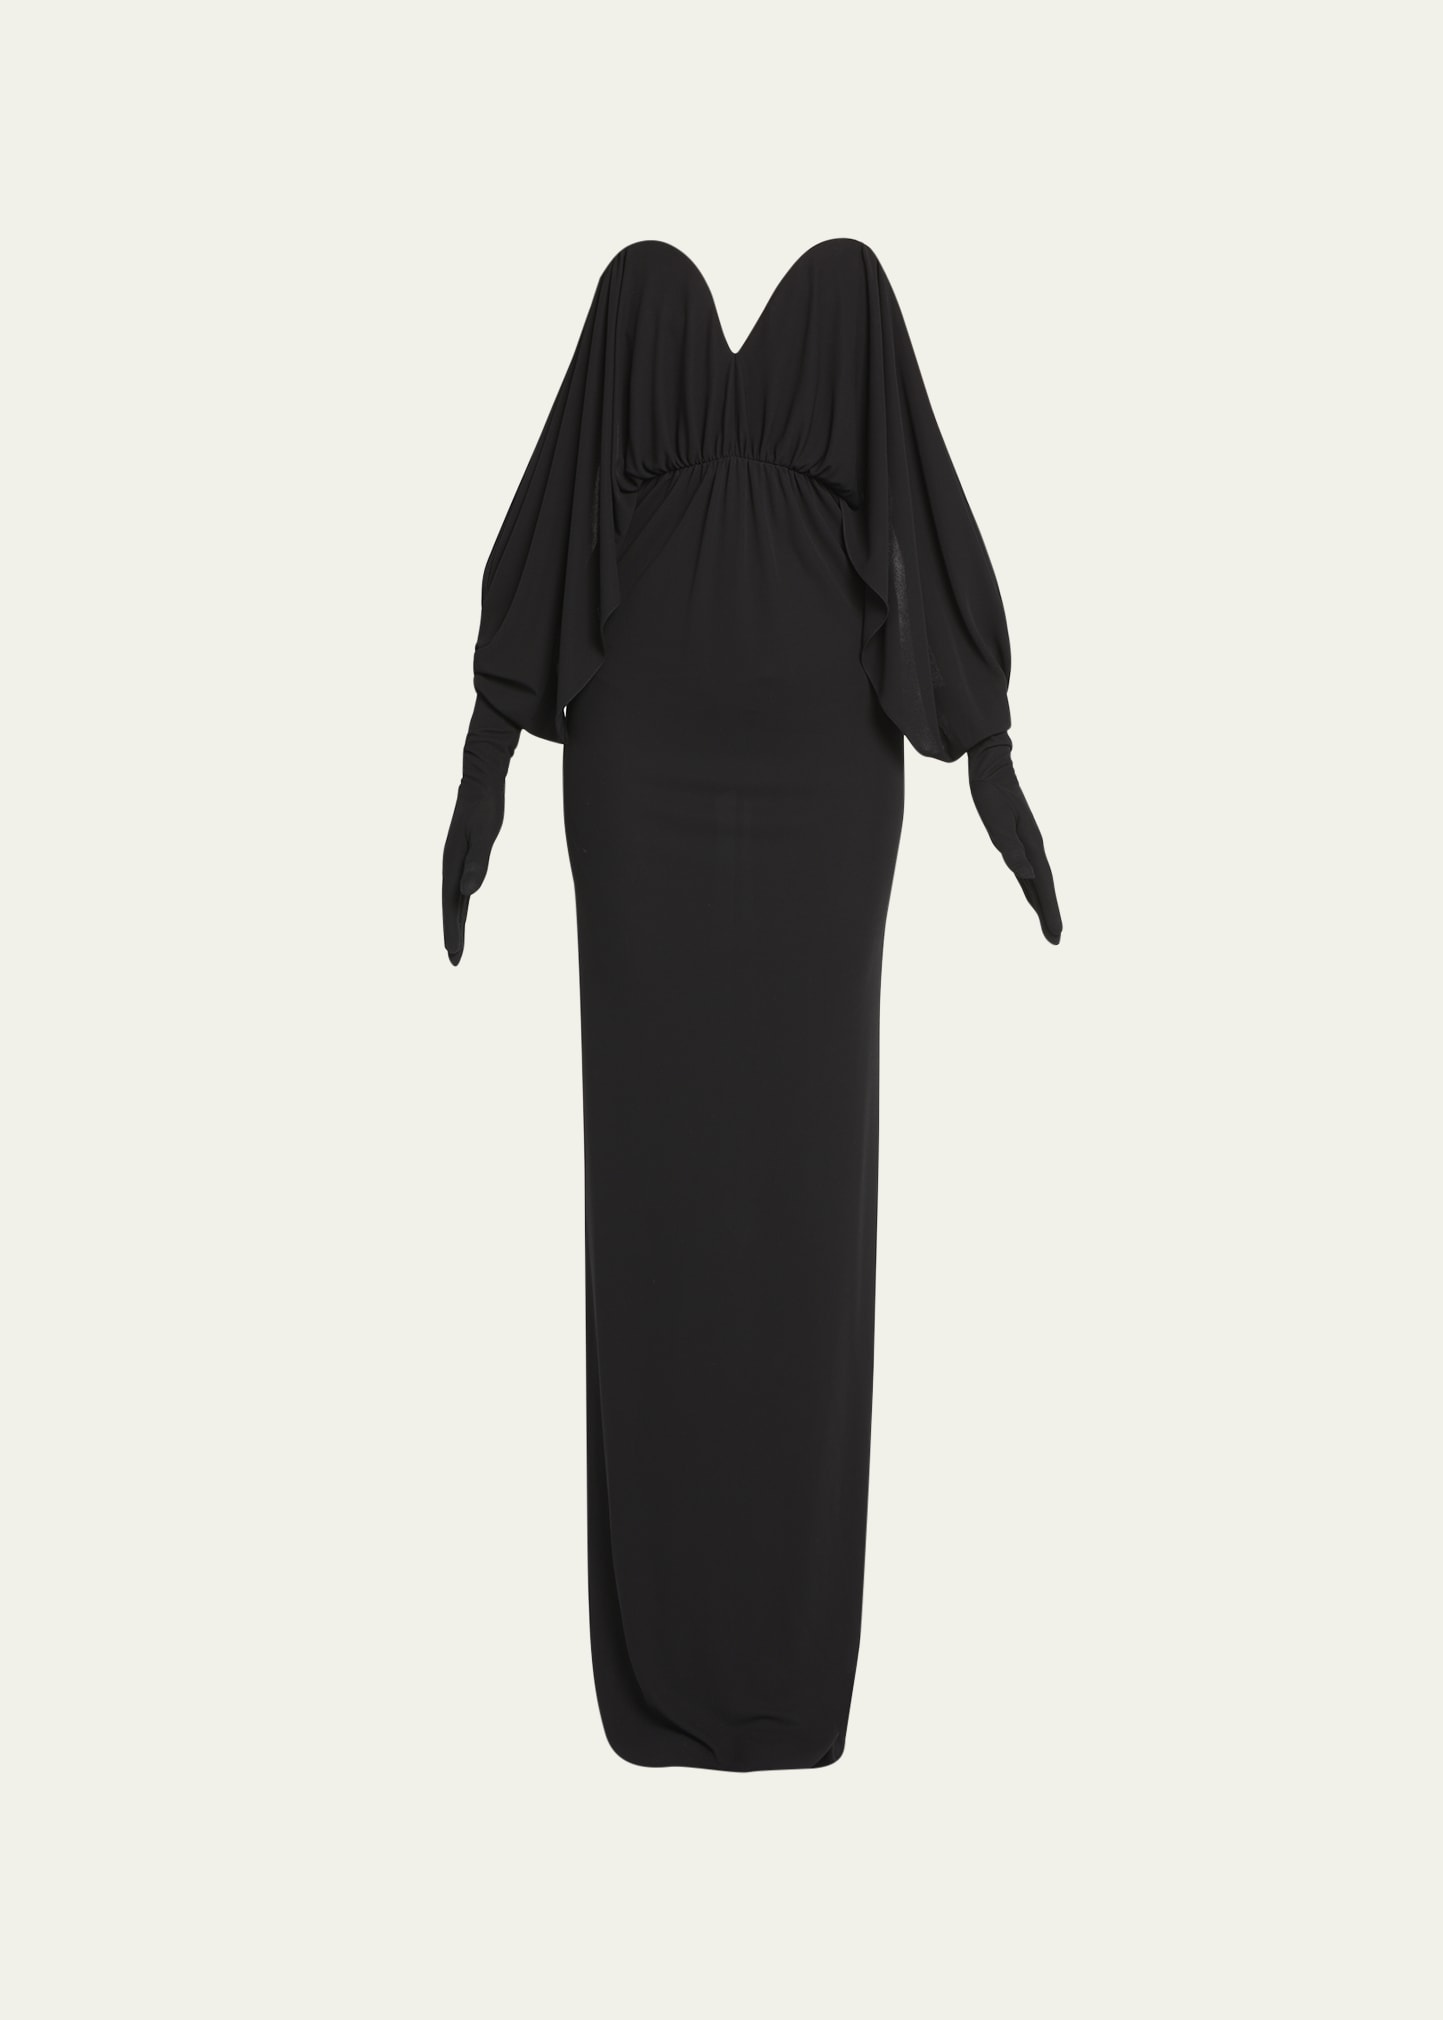 Off-Shoulder Gown with Glove Sleeves